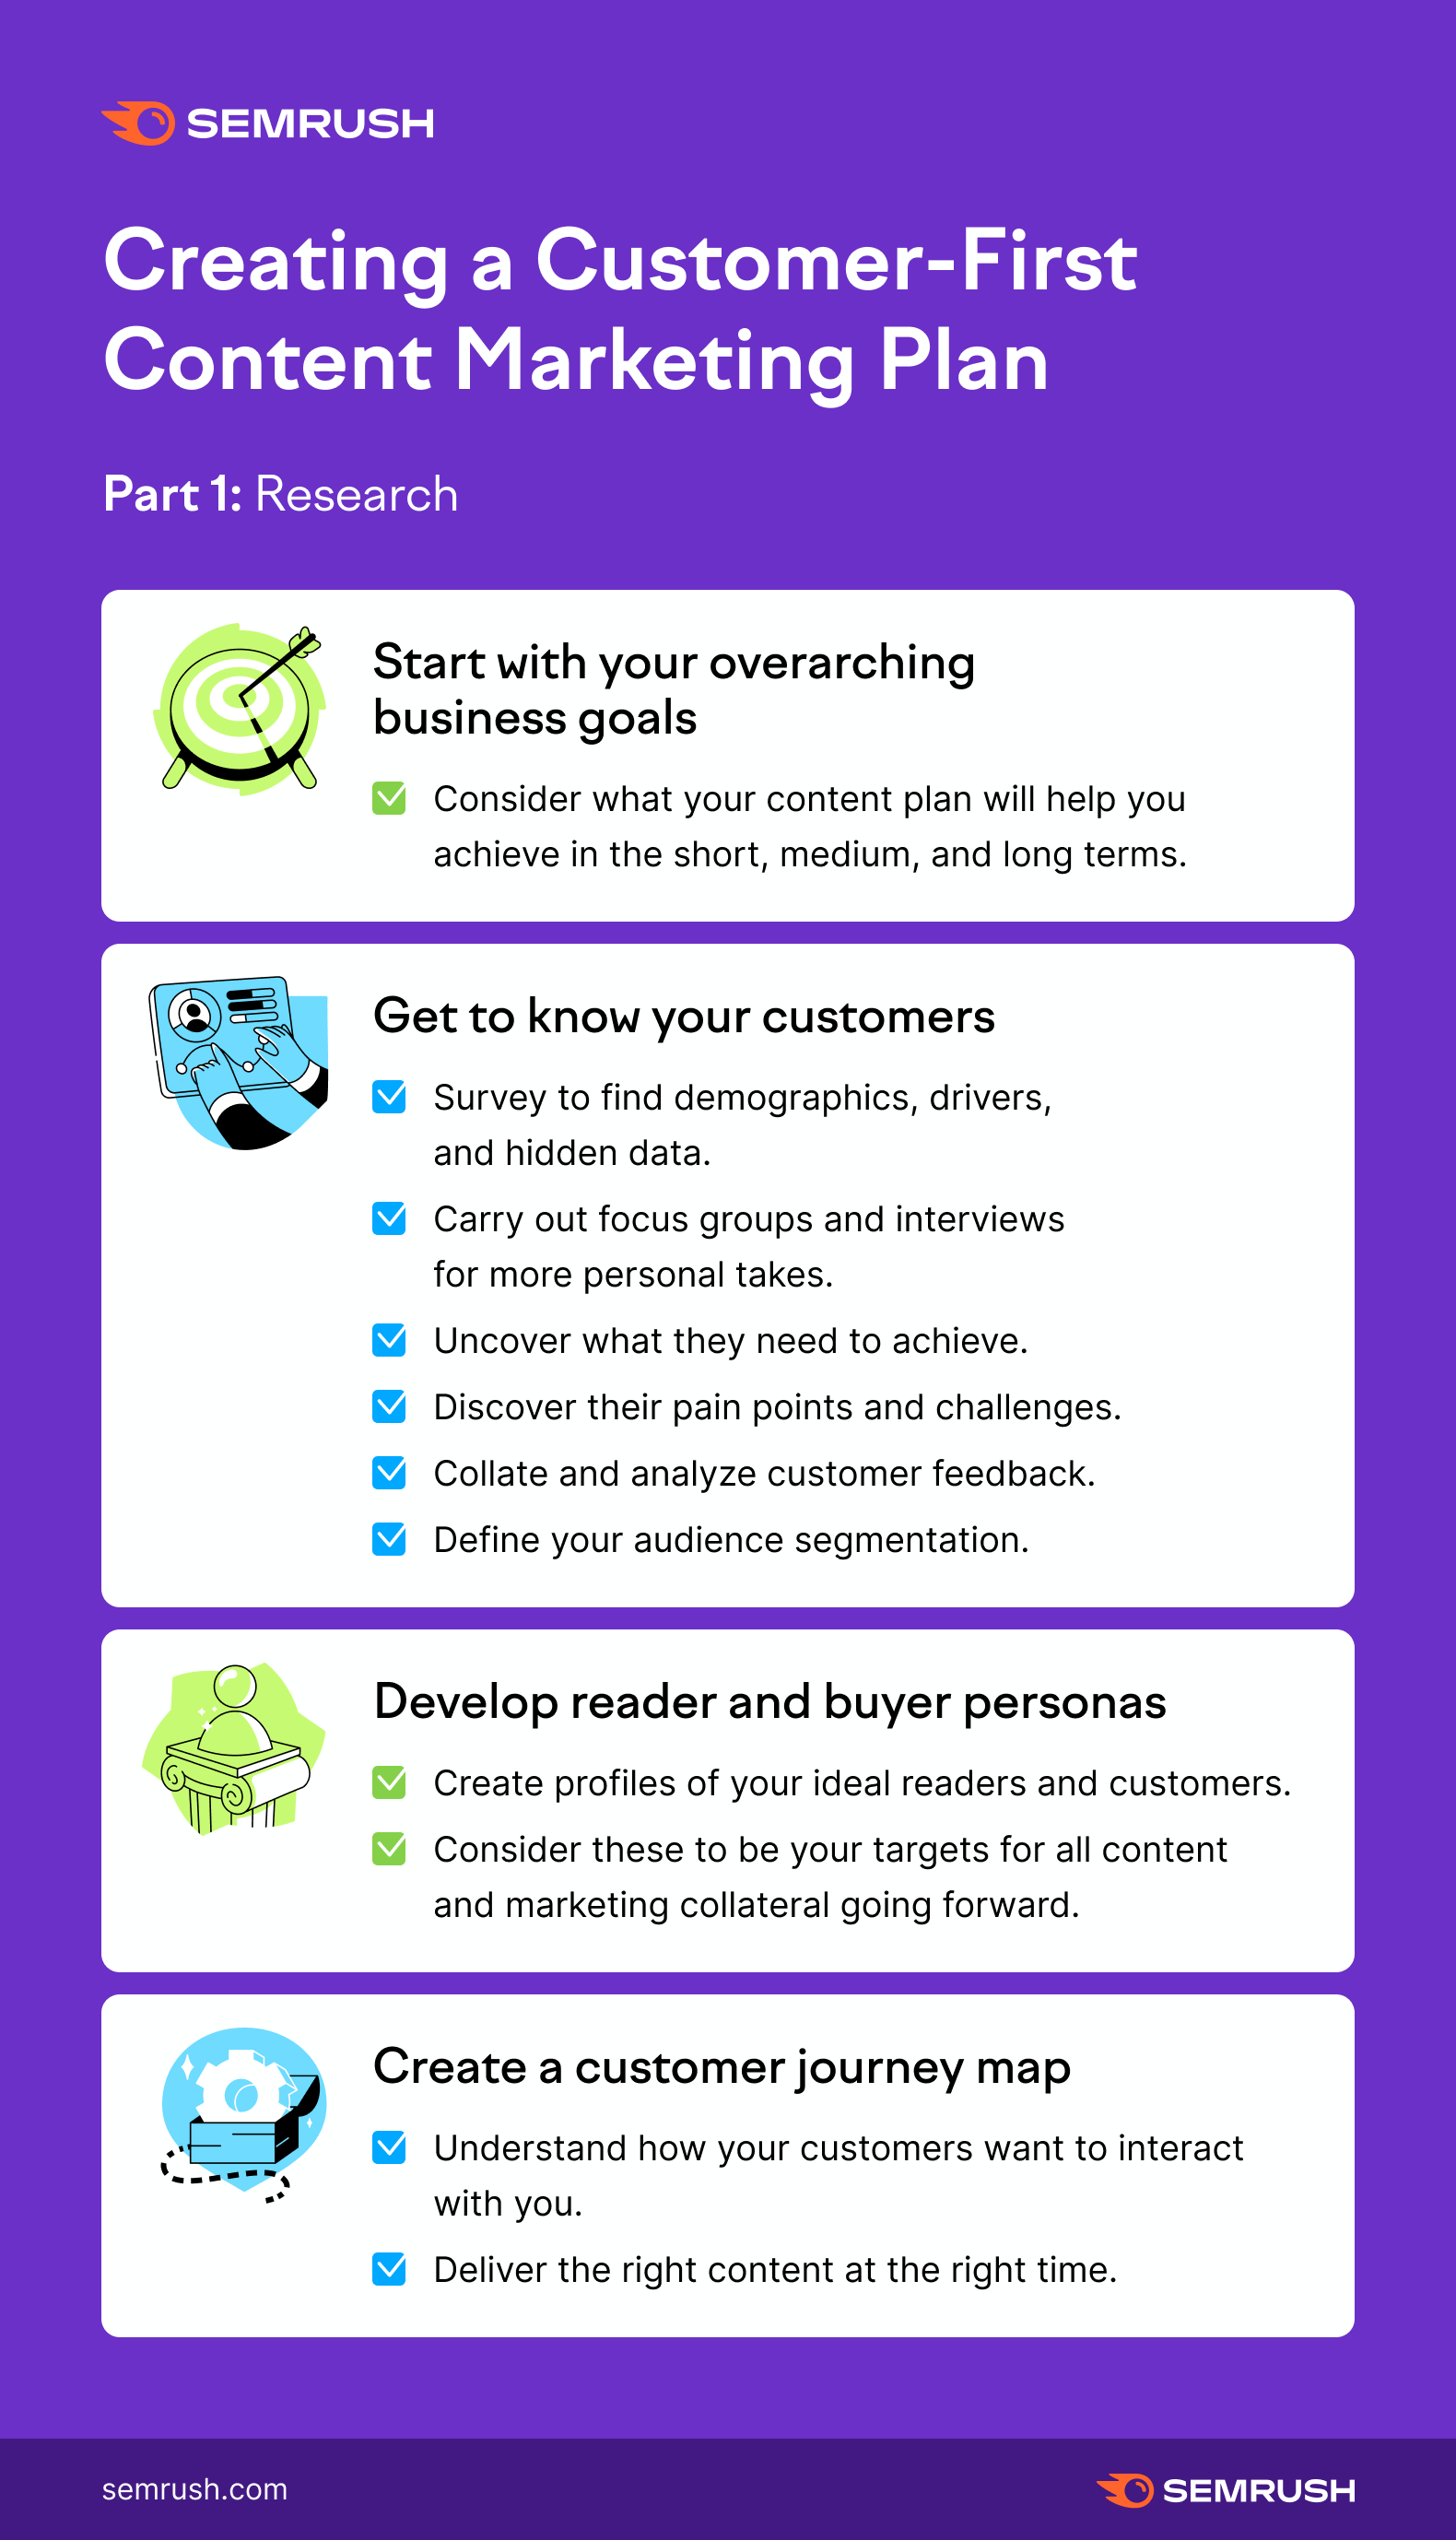 How to Create the Ultimate Customer-First Content Marketing Plan